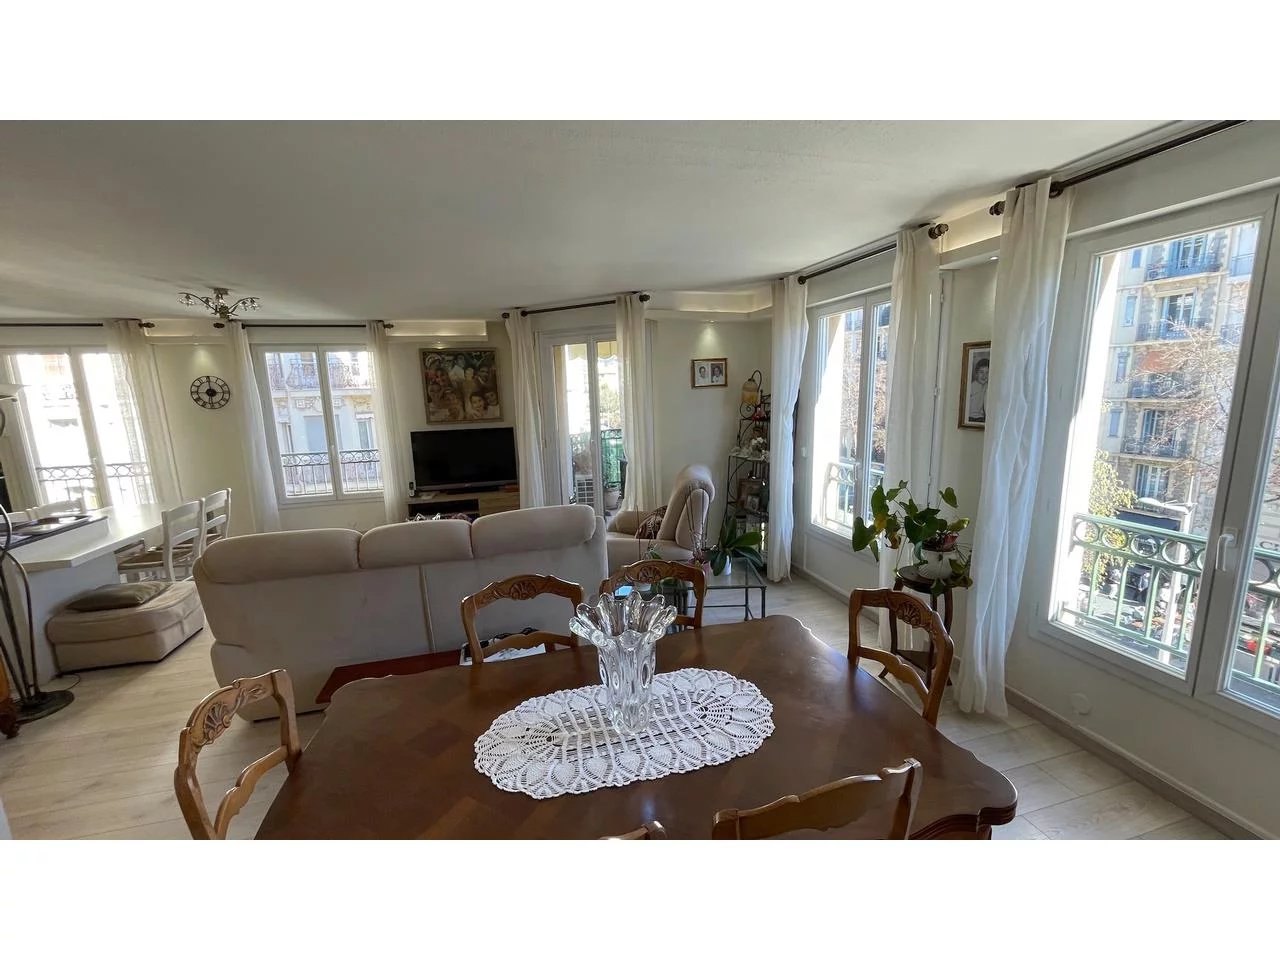 Appartement  3 Rooms 91.55m2  for sale   699 000 €